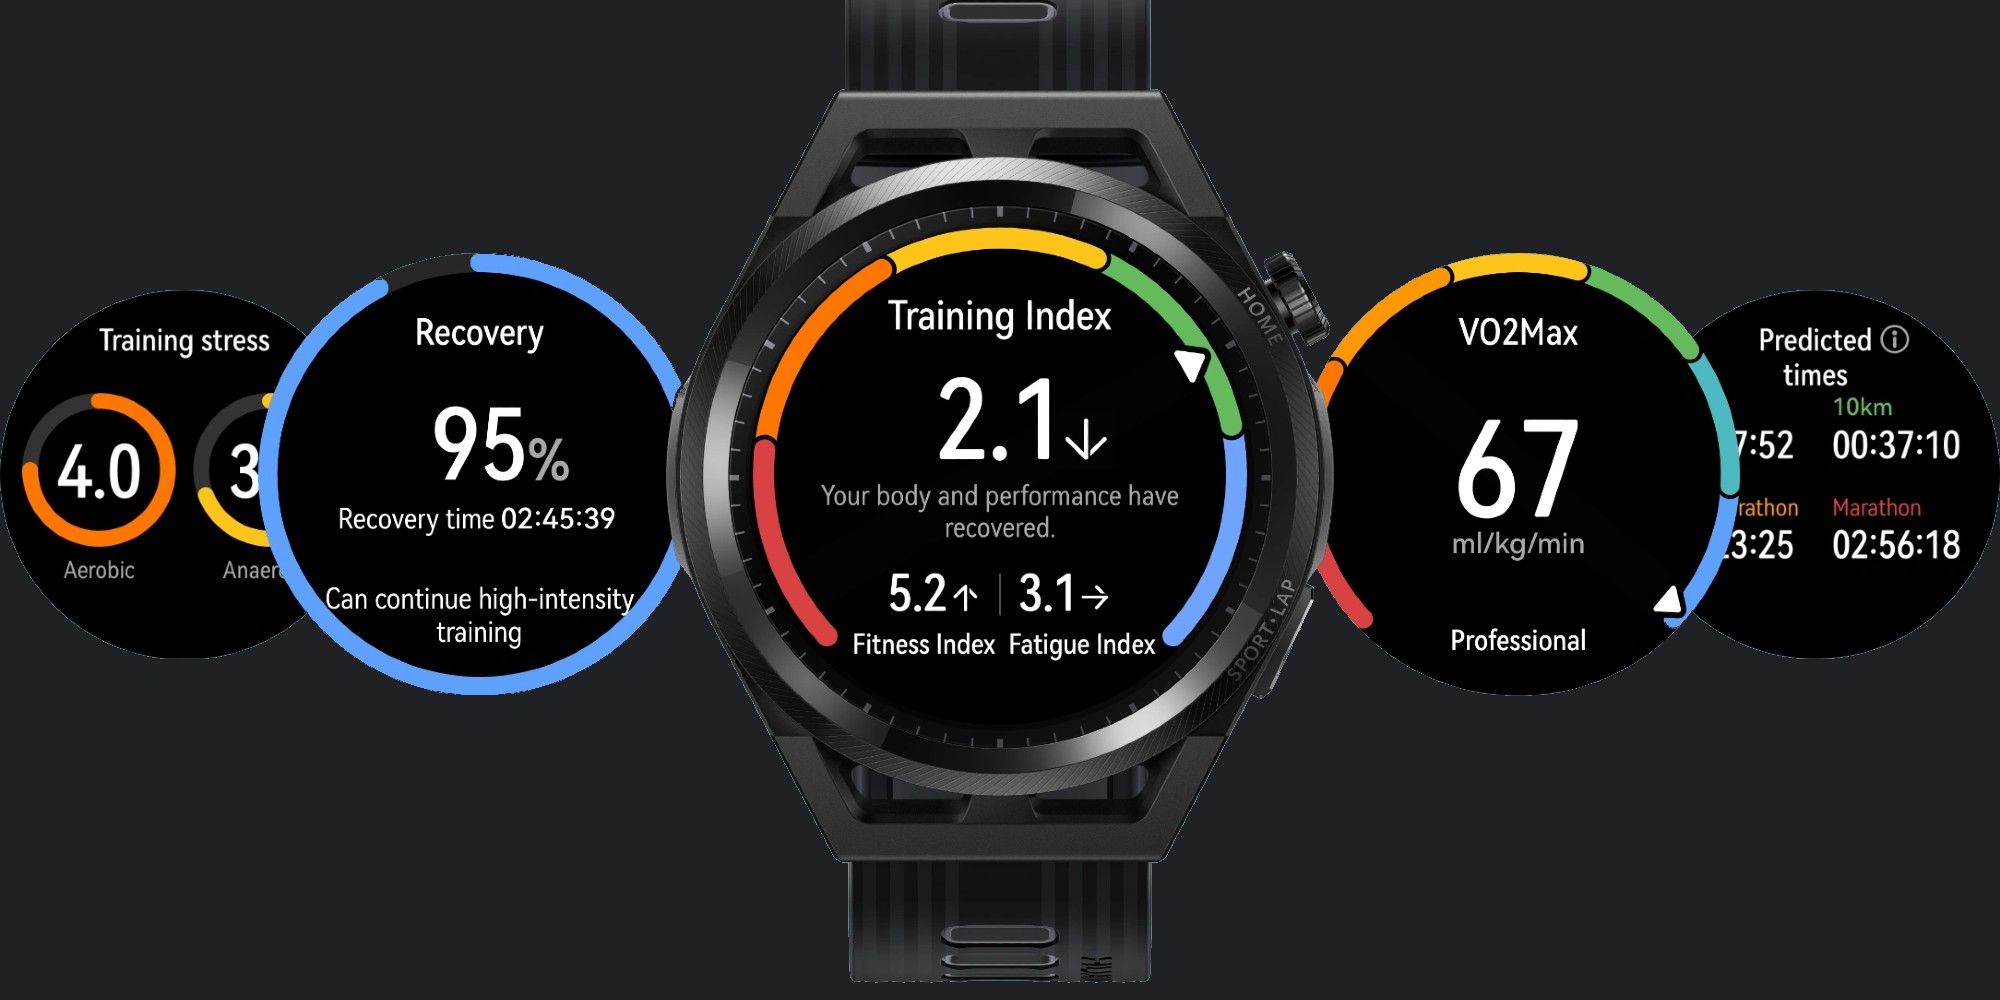 Huawei Watch GT Runner has features targeted at runners